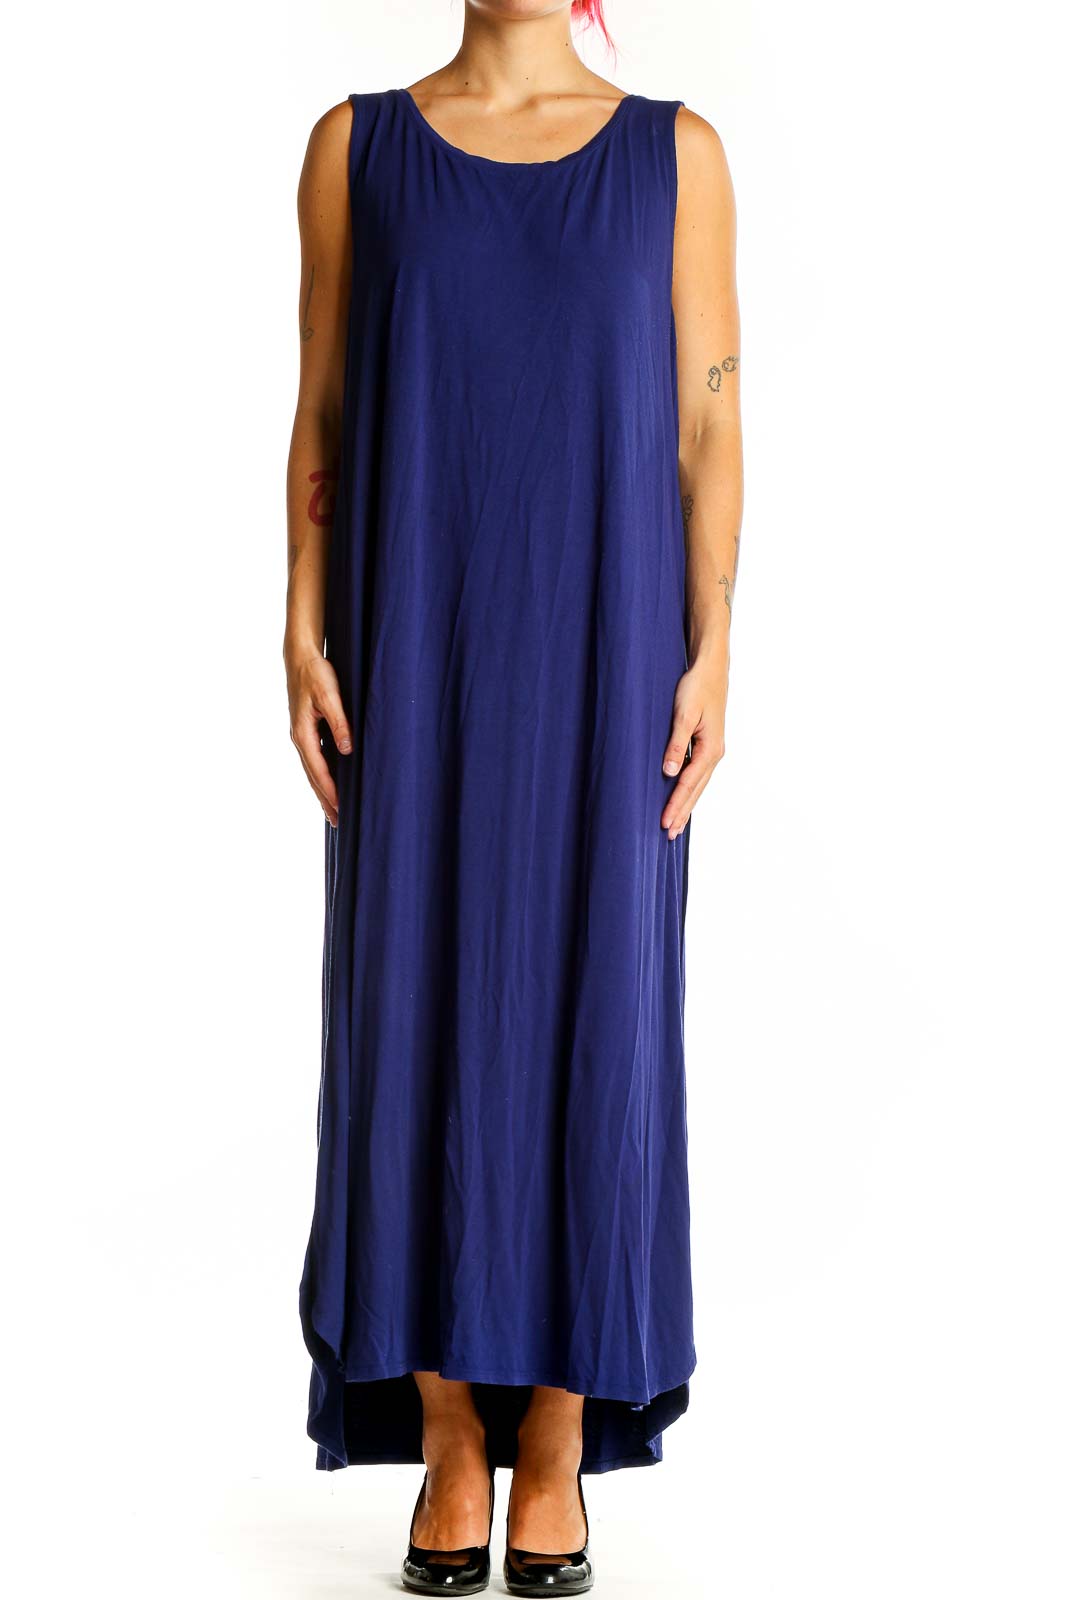 Blue Holiday Classic Solid Dress Front